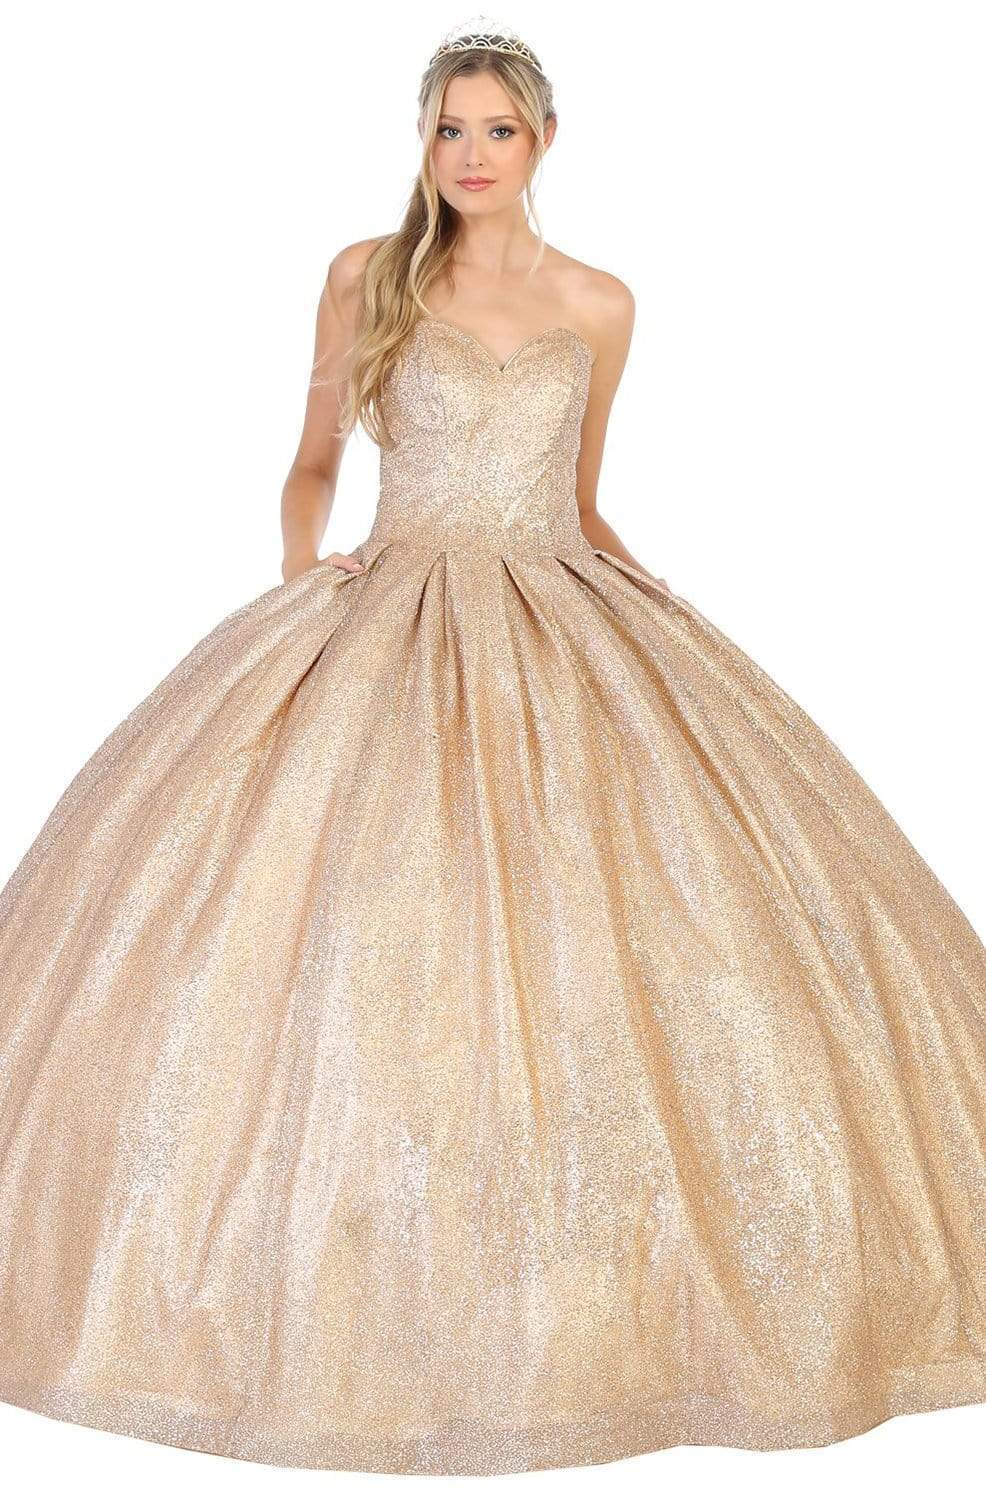 May Queen - LK138 Strapless Sweetheart Pleated Ballgown Quinceanera Dresses 4 / Champagne/Gold